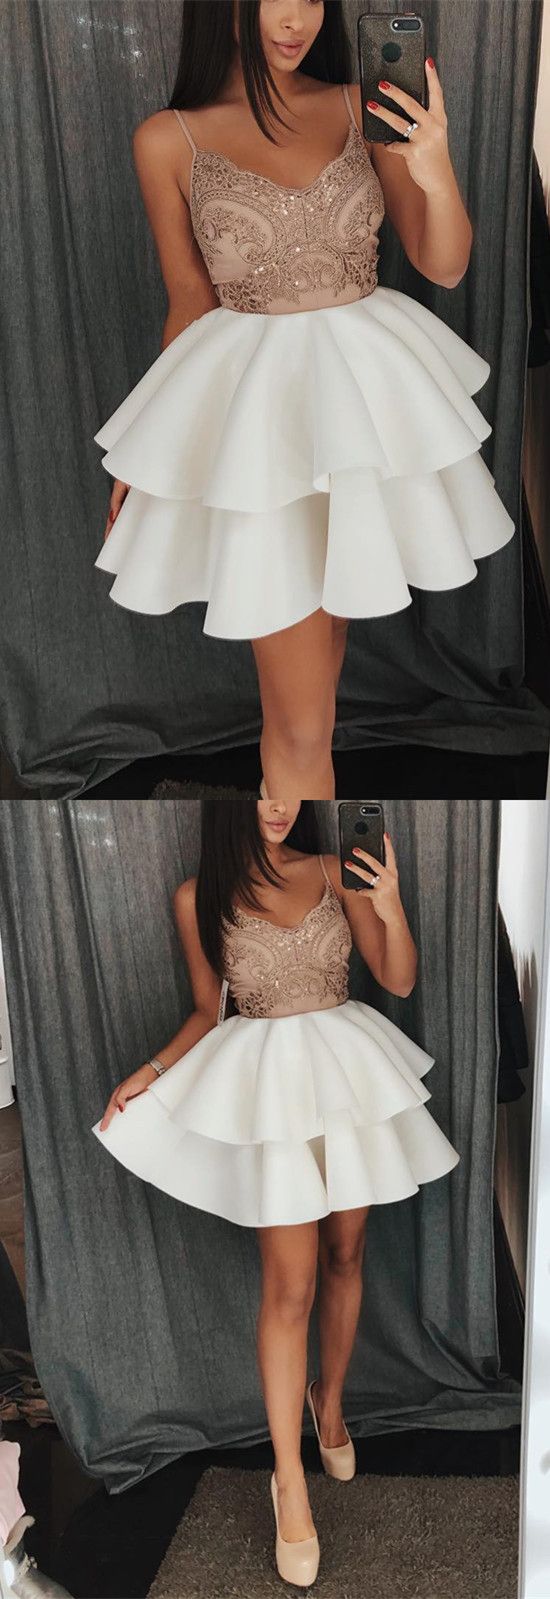 Champagne Lace Appliques V-neck Ruffles Homecoming Dresses Short Prom Gowns M3291